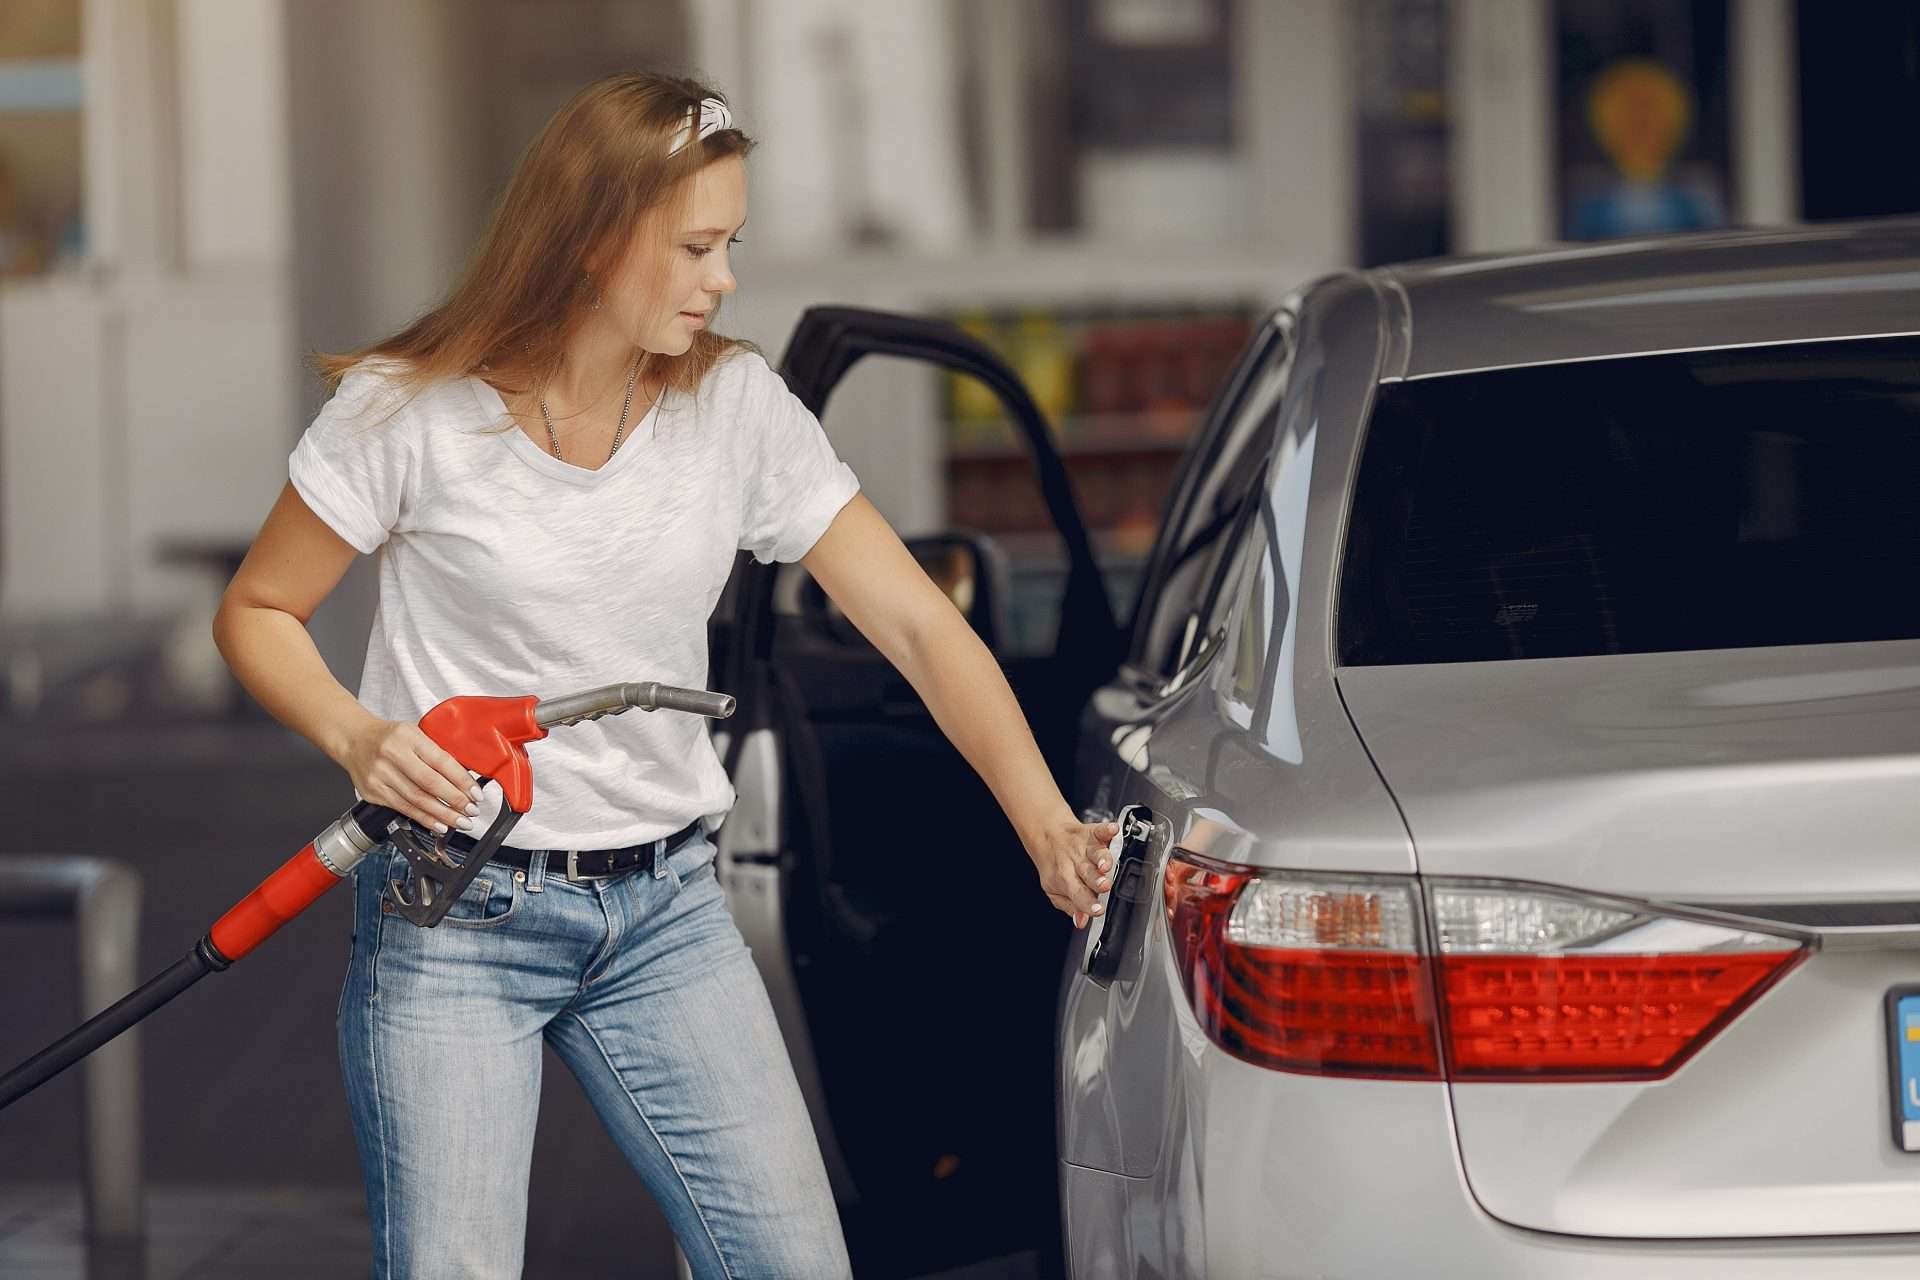 Woman refilling car with gas that doesn't have ethanol